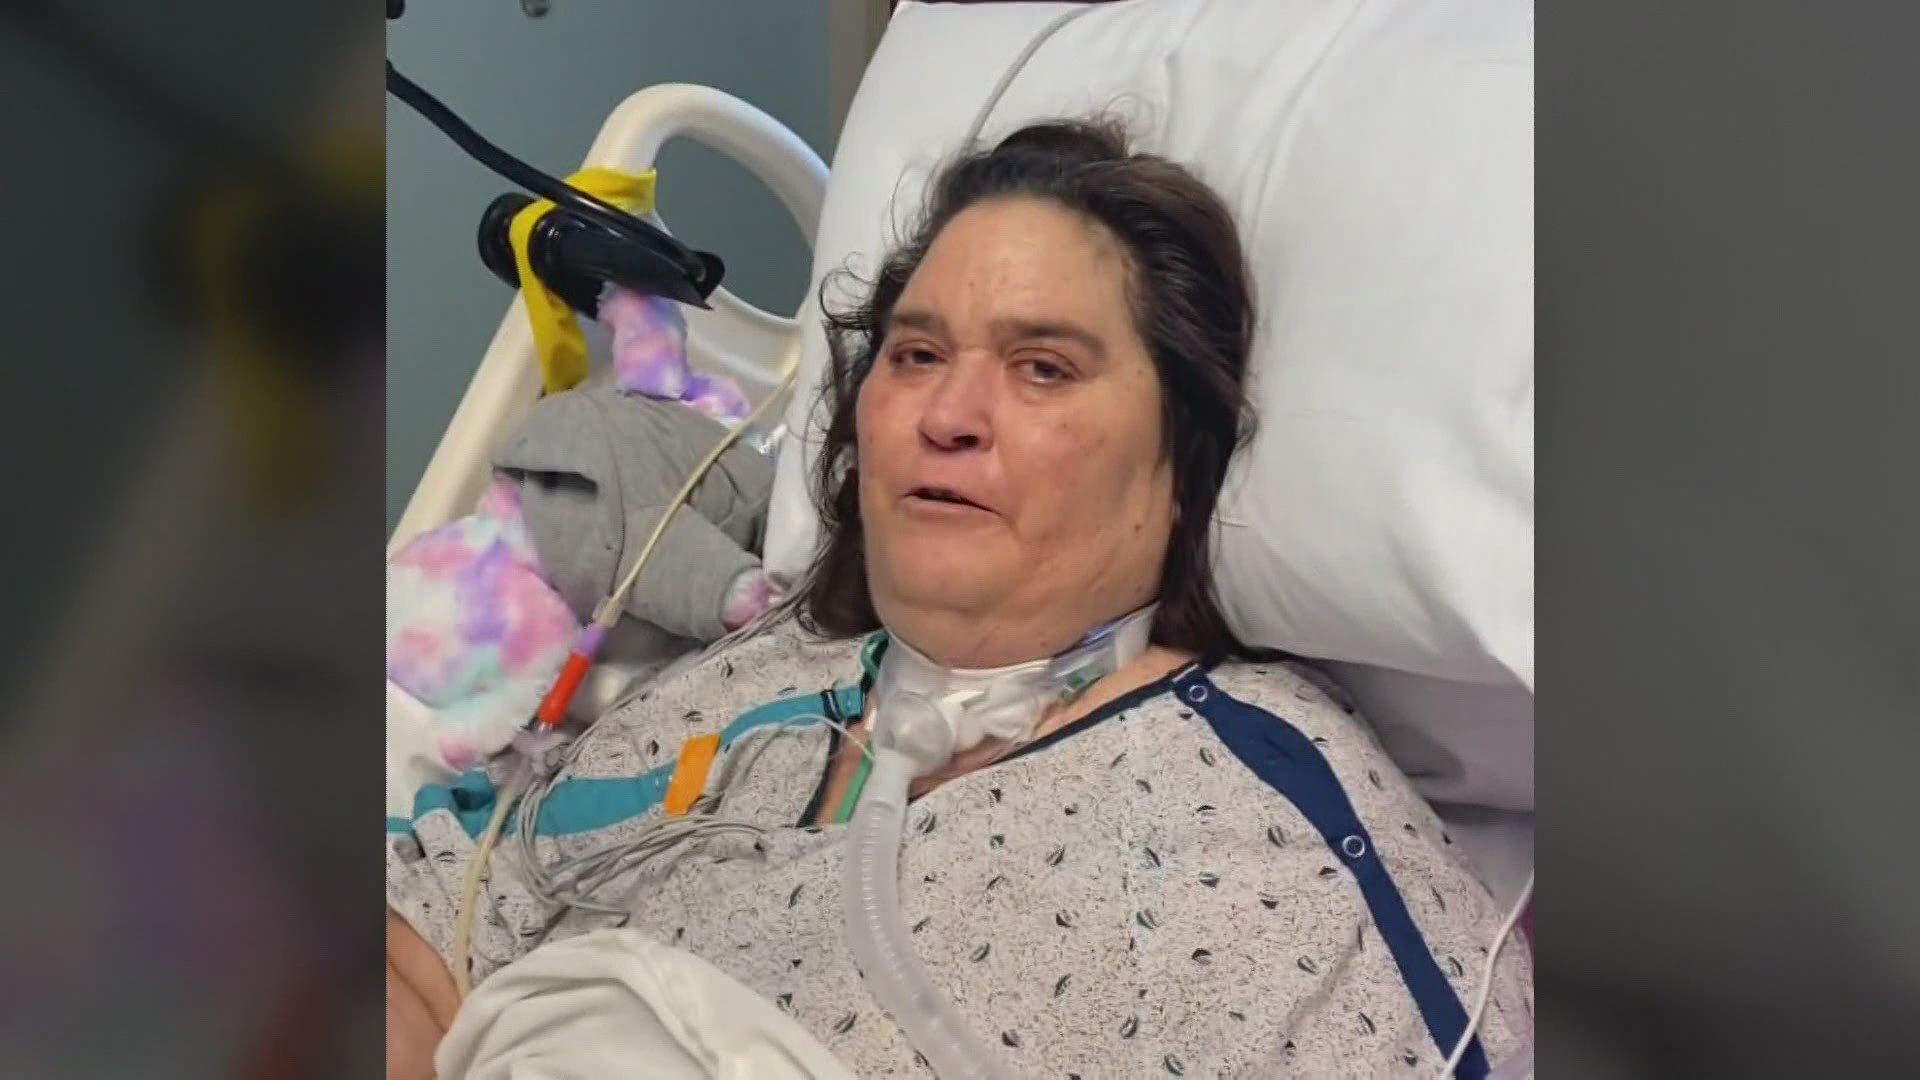 Robyne Griffin, 61, became infected with COVID-19 in early January. Her health turned a major corner recently, and she says her family's love is the reason why.